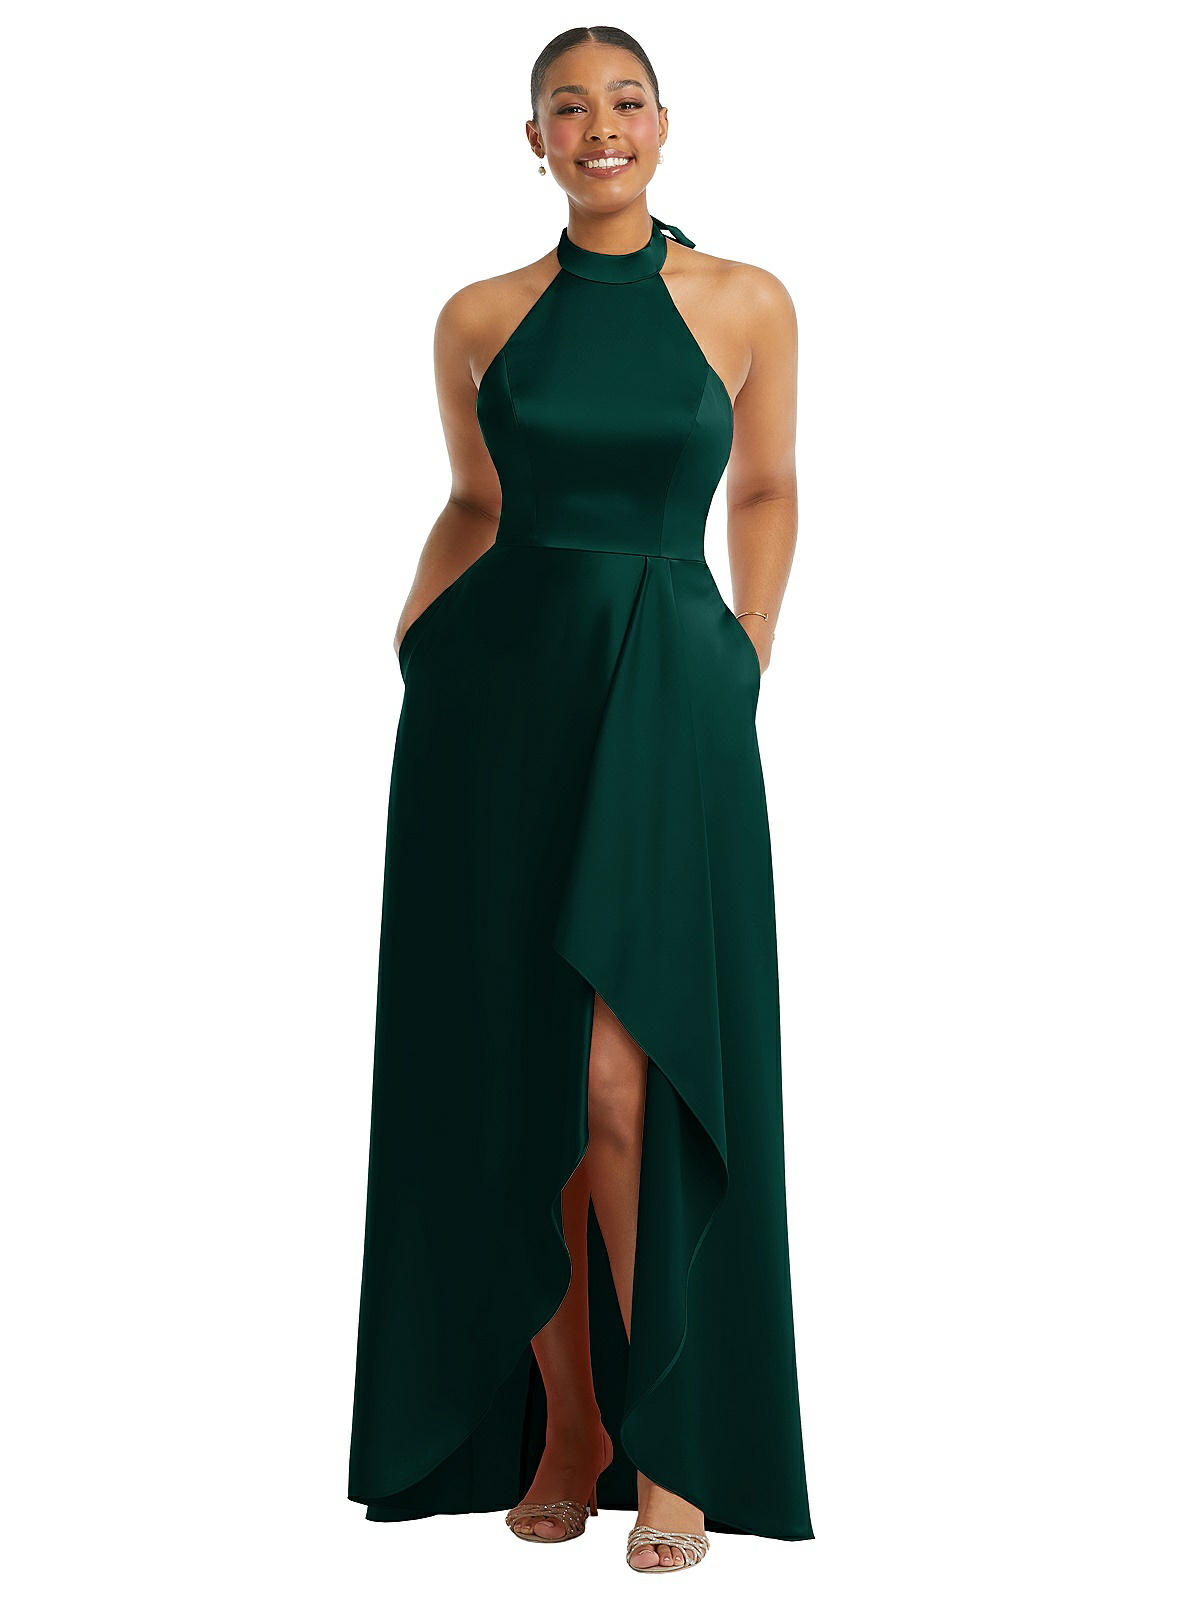 High-neck Tie-back Halter Cascading High Low Maxi Bridesmaid Dress In  Evergreen